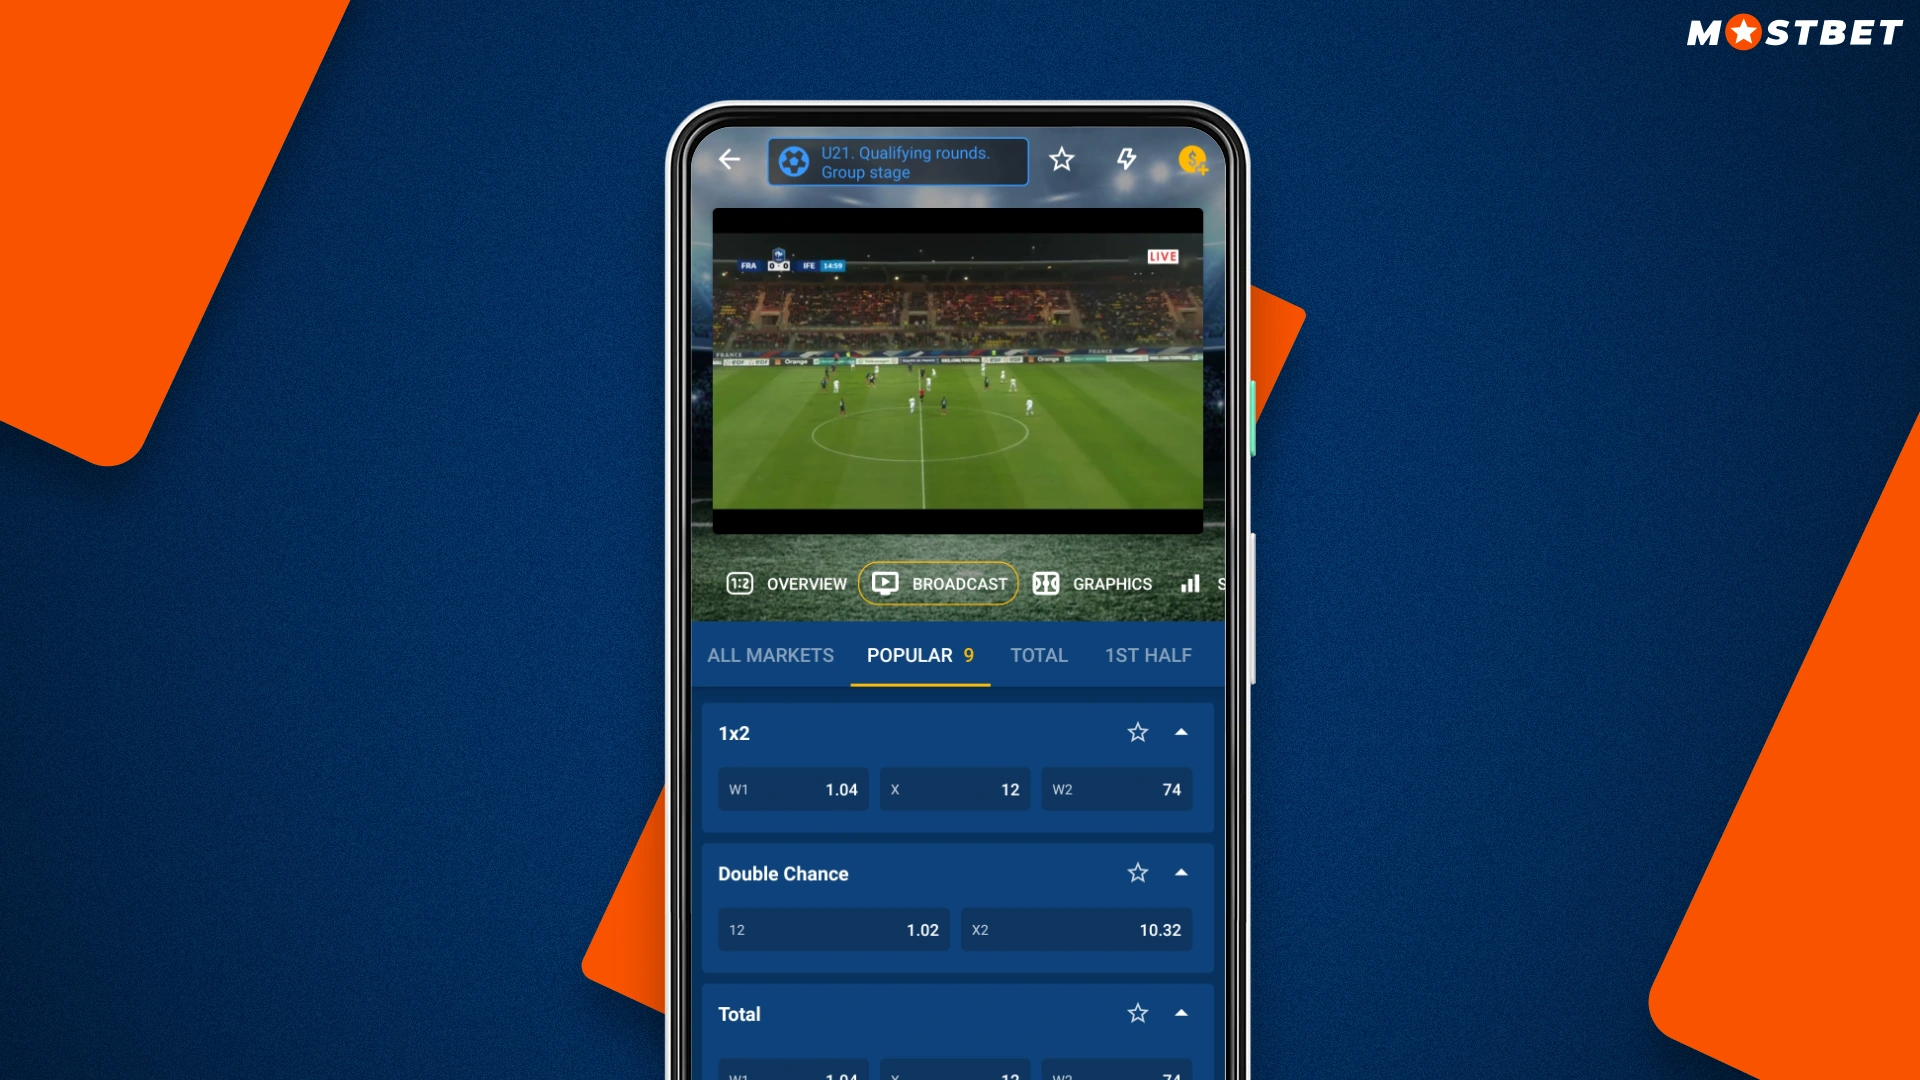 list of the main features of the mostbet mobile sports betting app